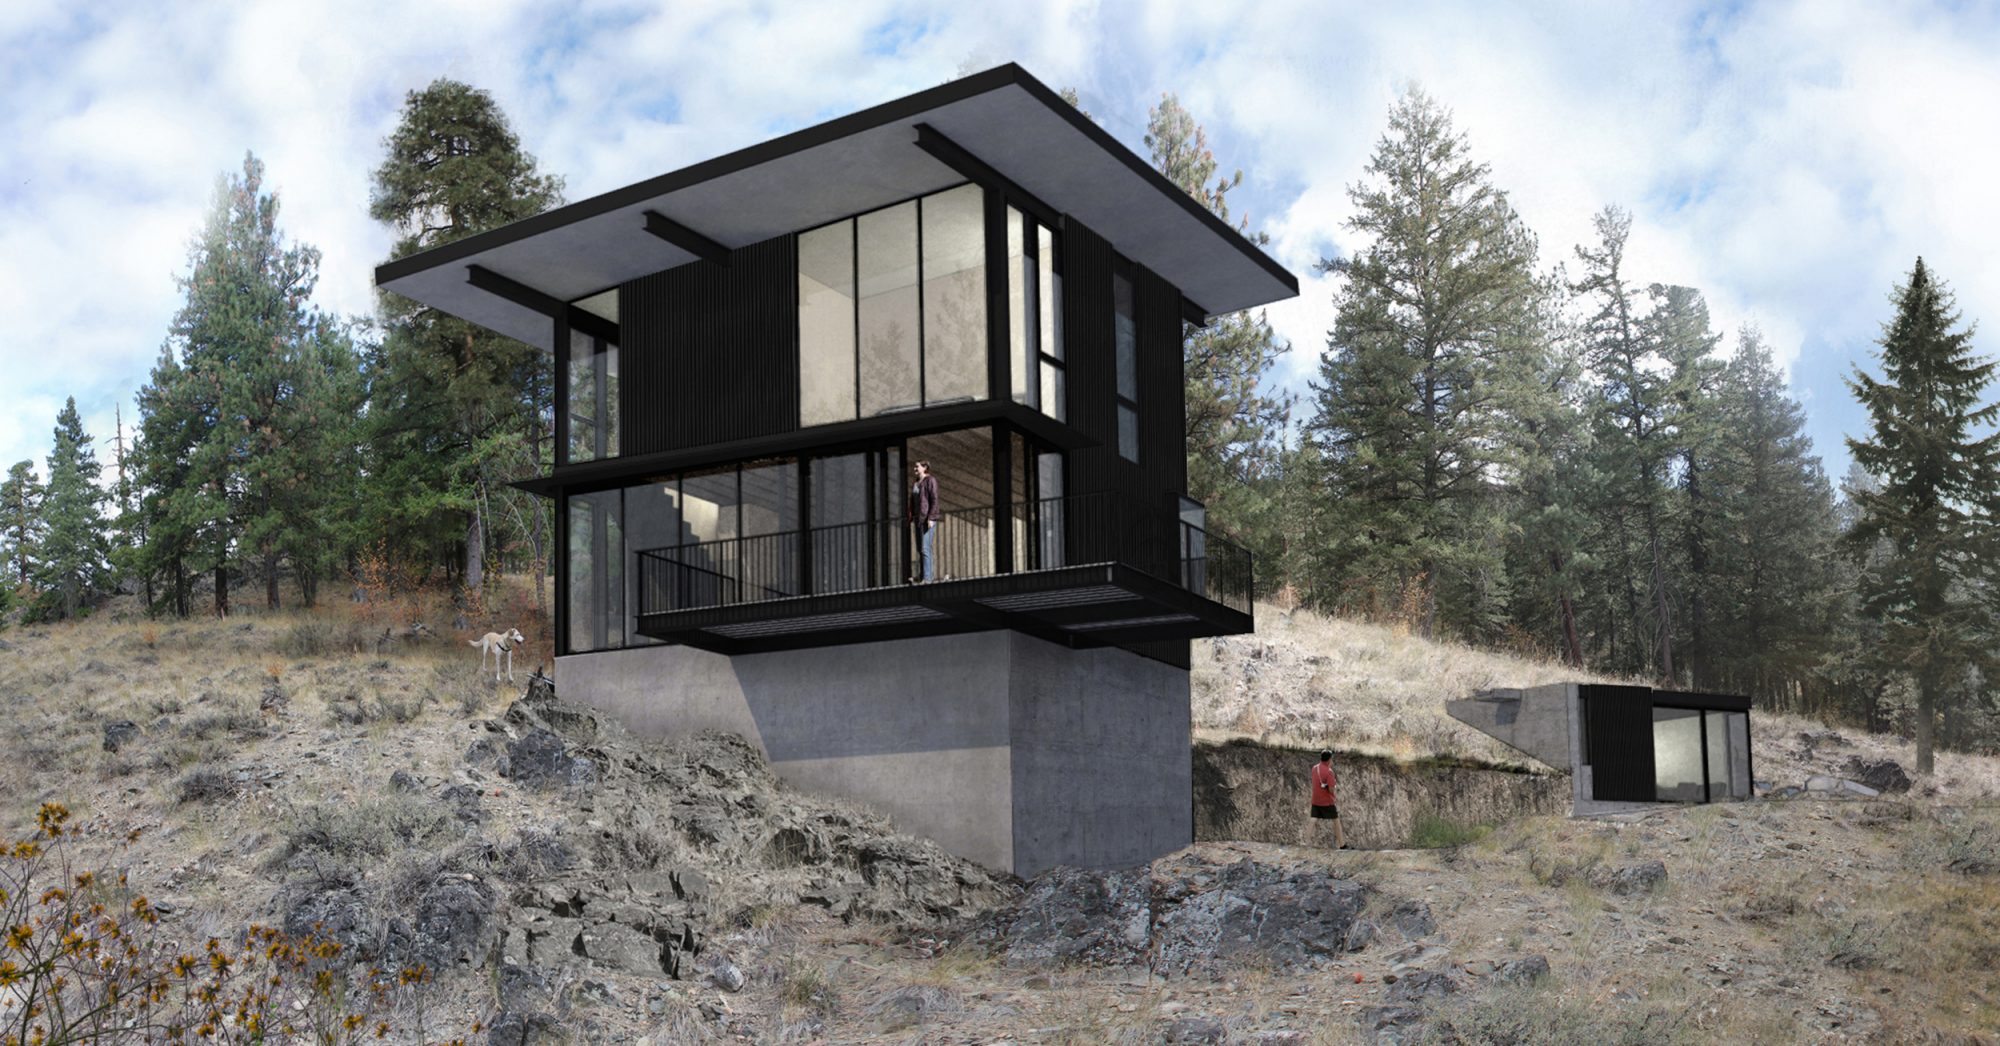 ARROWLEAF CABIN CONCEPT RENDERING WITH TINYLEAF